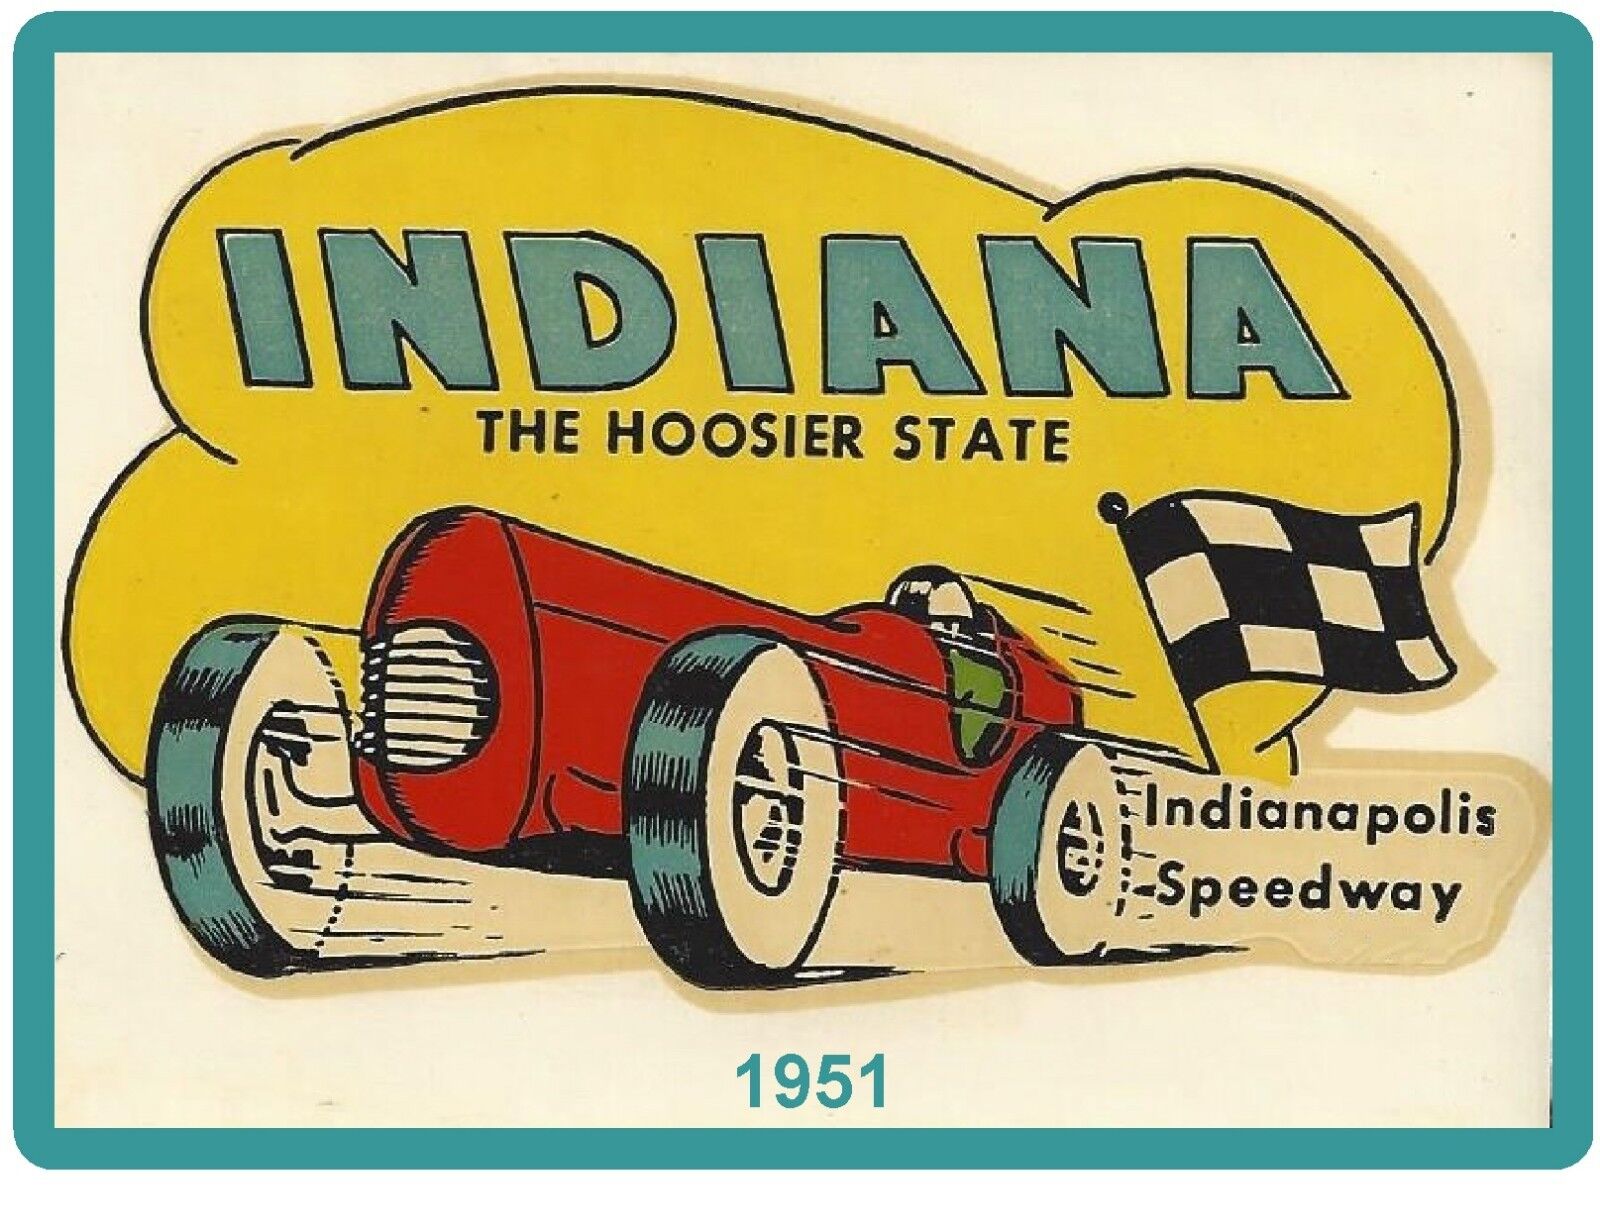  1951 INDY 500 INDIANA  INDIANAPOLIS SPEEDWAY  Refrigerator / Tool Box Magnet  